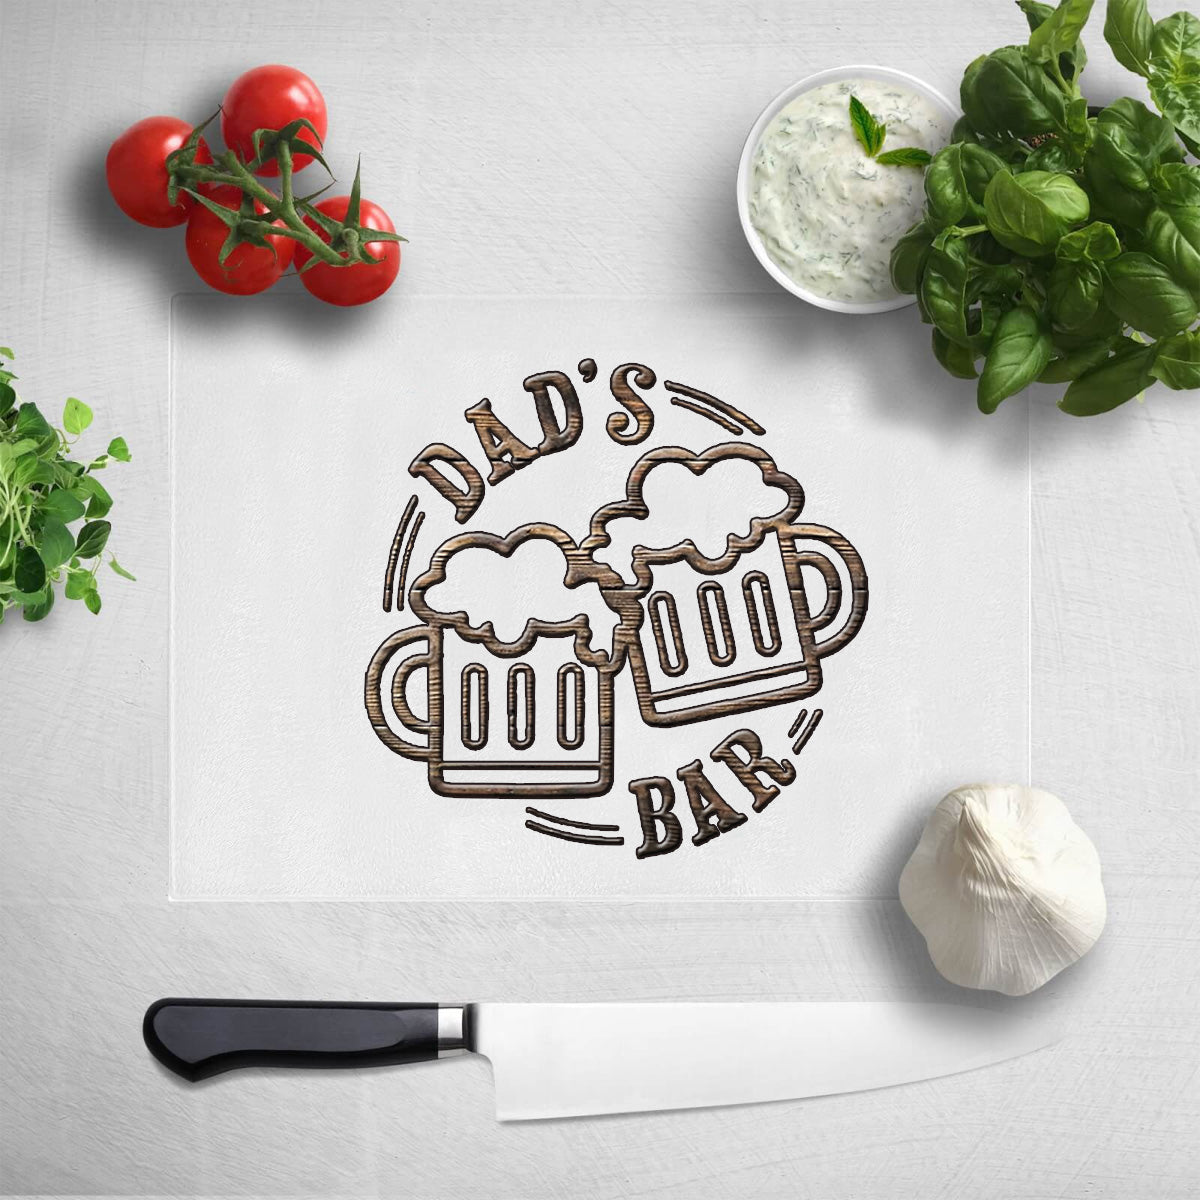 Dad's Bar Glass cutting board full color sublimation printing